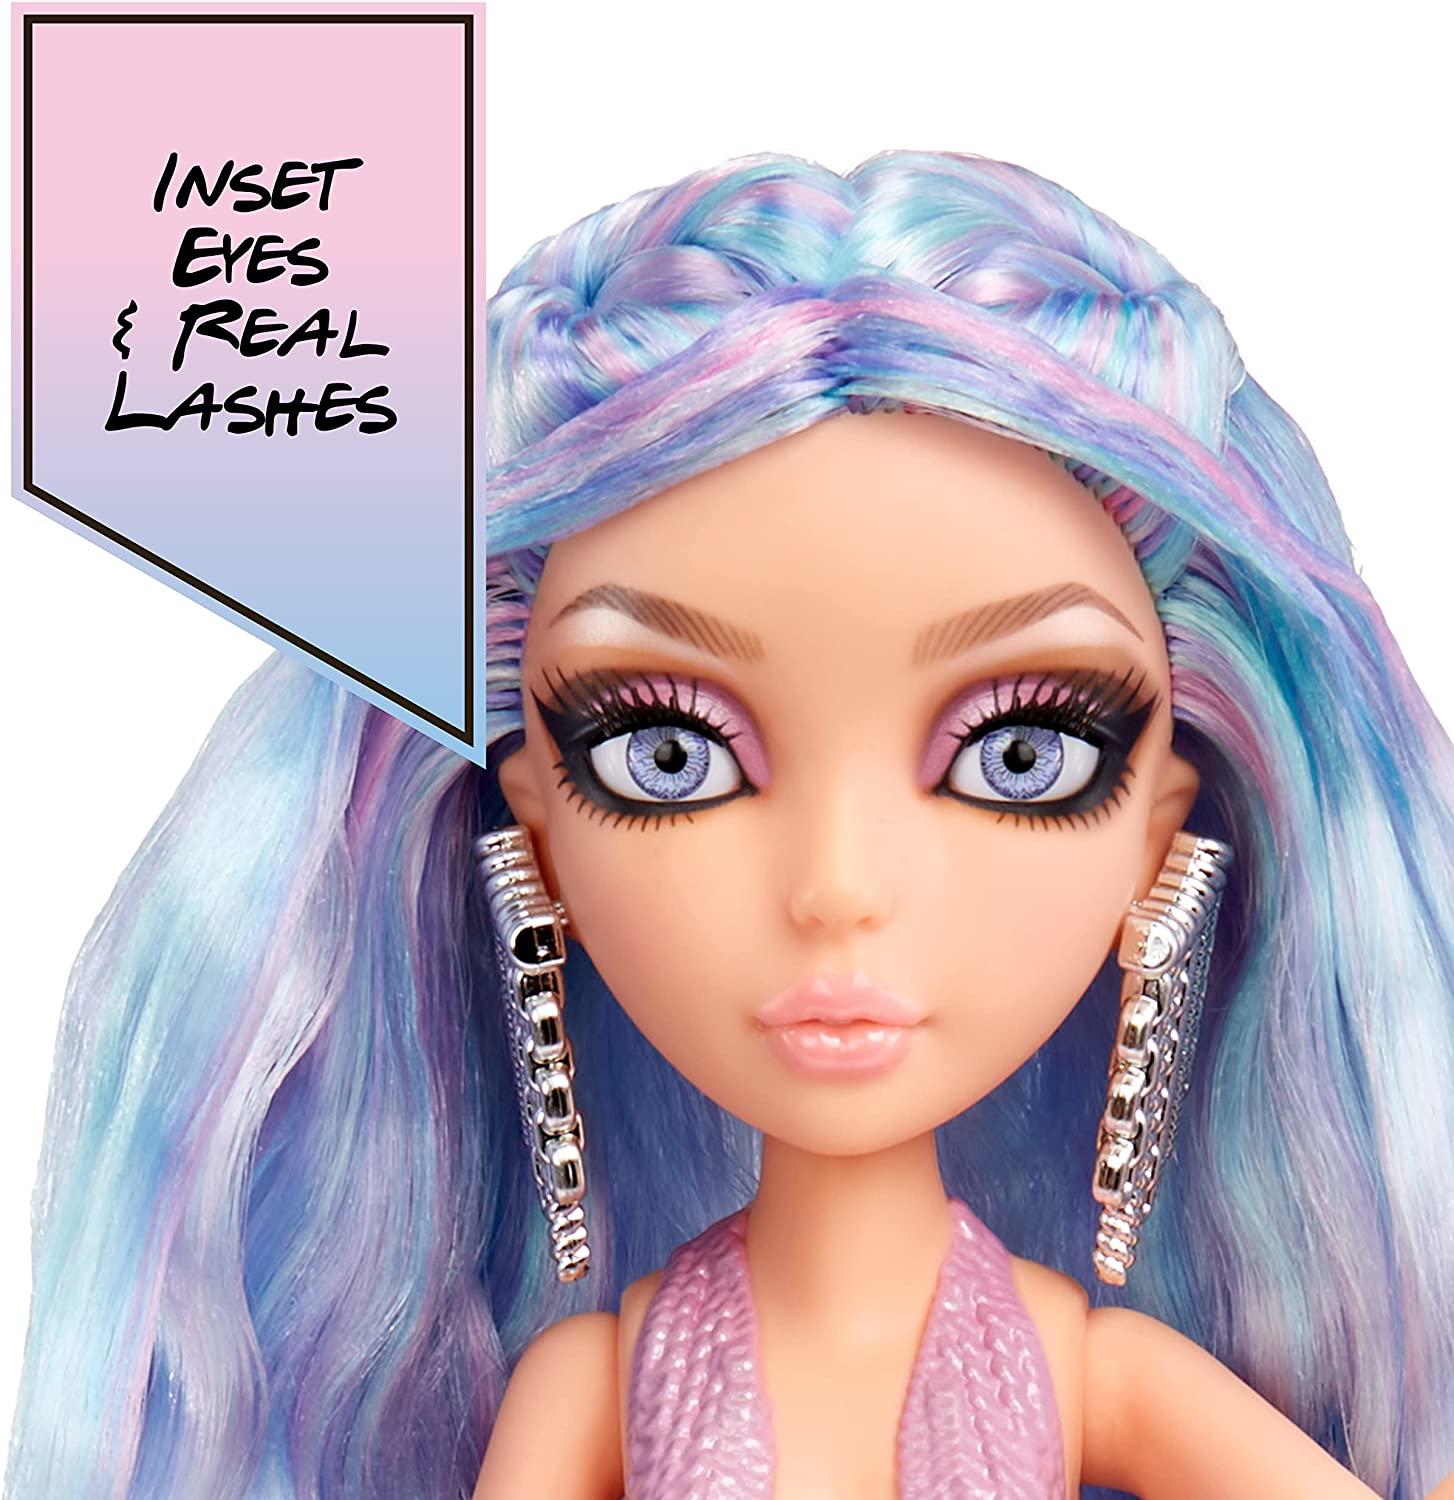 MERMAZE MERMAIDZ Color Change Orra Deluxe Fashion Doll with Wear and Share Hair Play